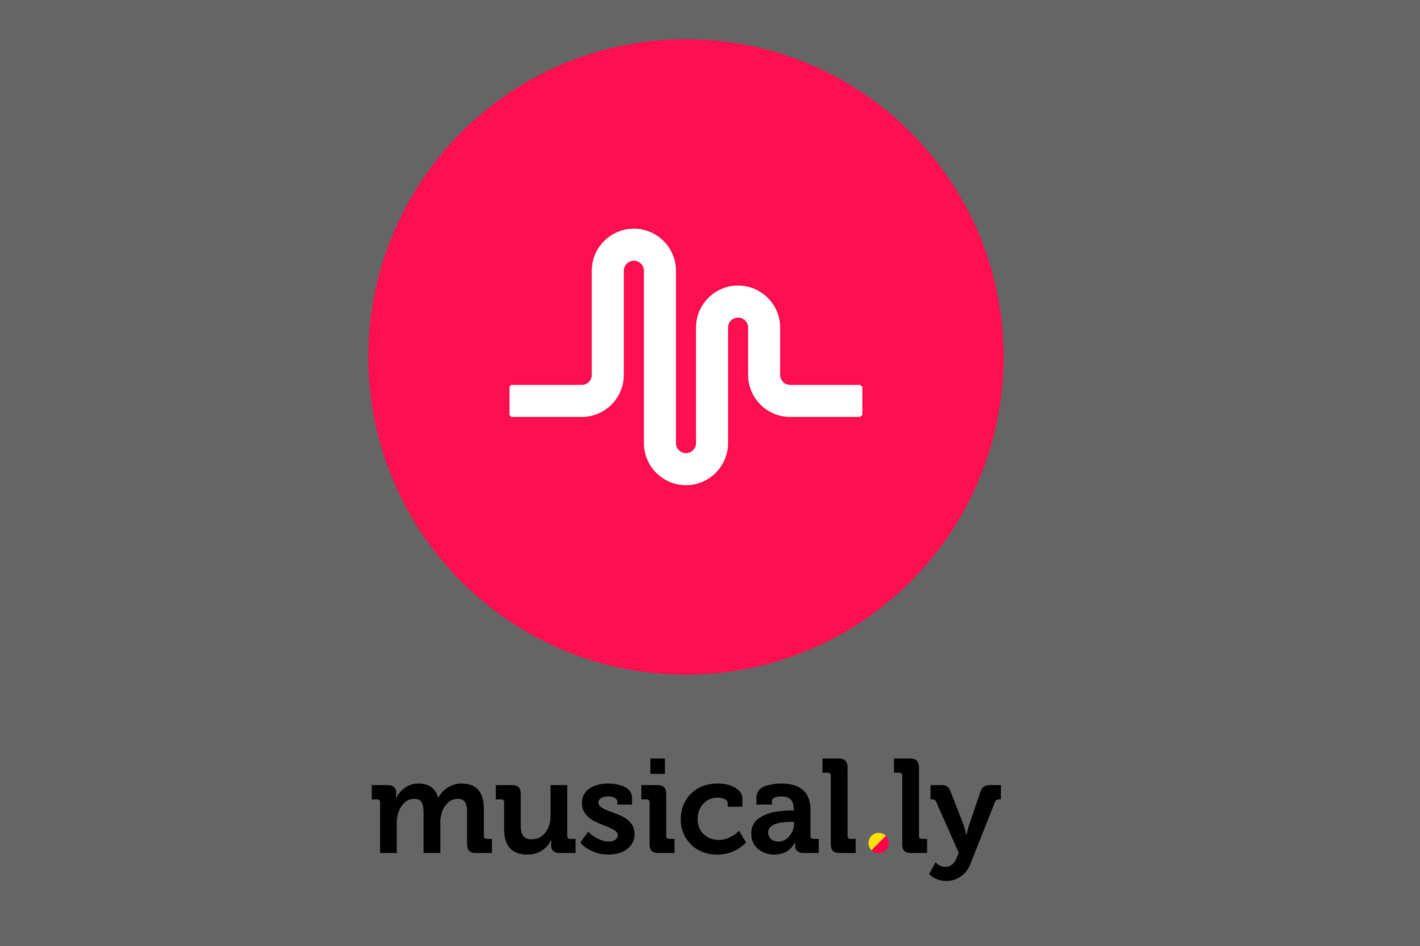 Music.ly Logo - Chinese firm nabs social video app Musical.ly for as much as $1 billion